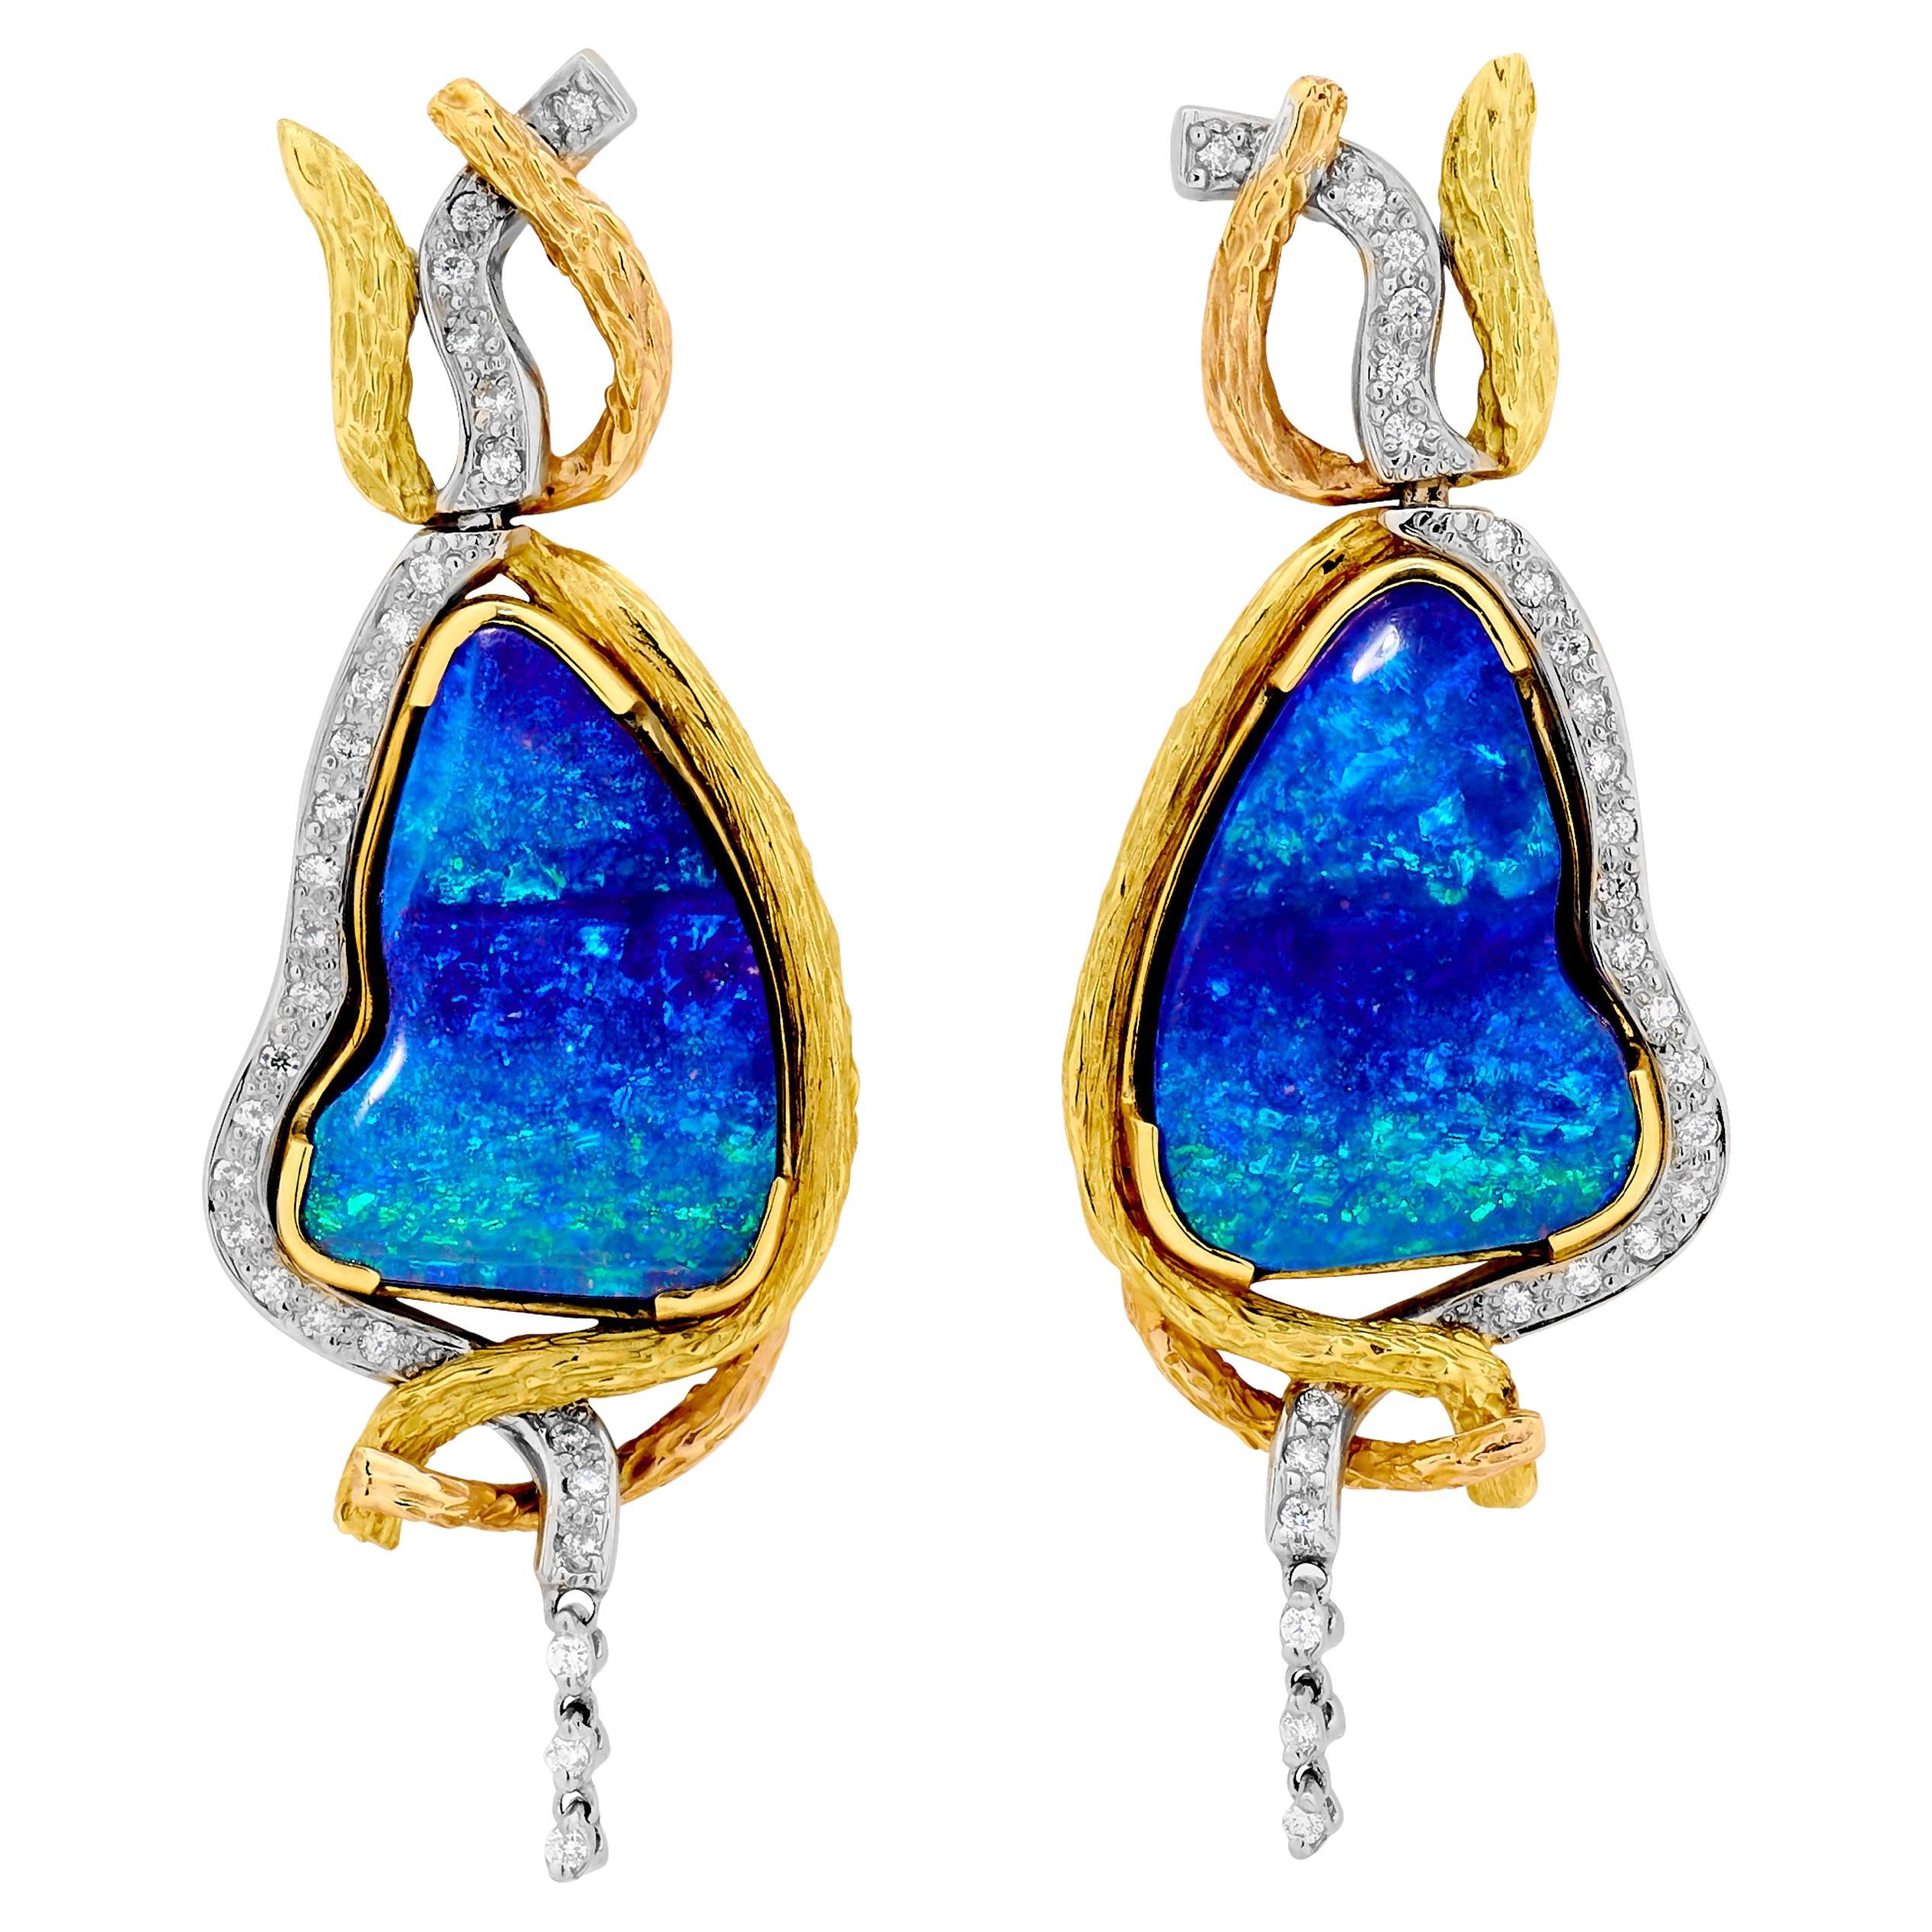 The power of nature cradling the remnants of the ancient civilisation of Angkor in Cambodia inspired Renata Bernard to create the marvelous Ta Prohm set of Australian opal pendant, ring, and earrings. 

The 'Ta Prohm' boulder opal pendant is an